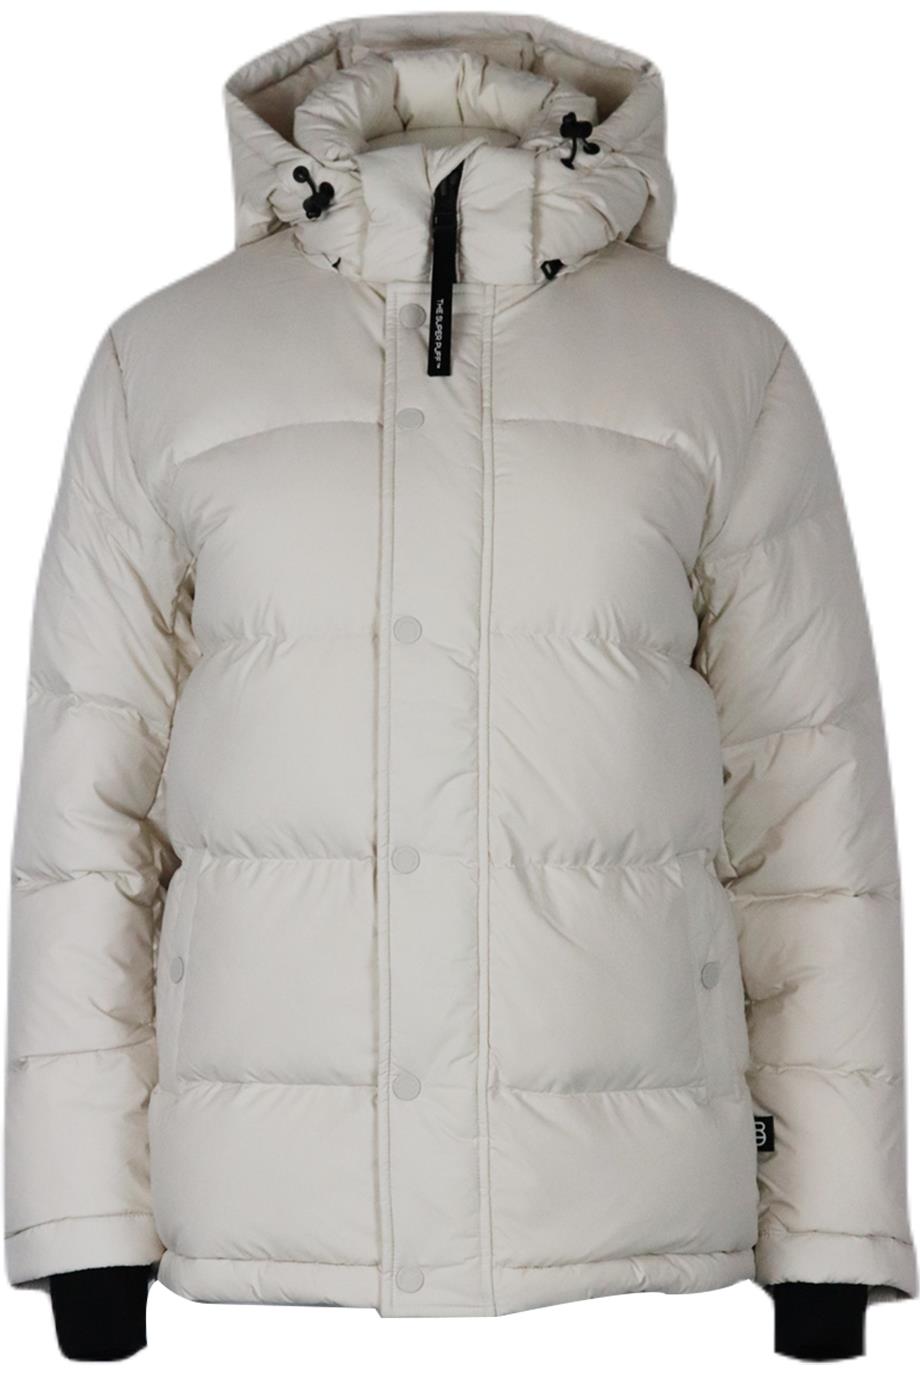 SUPER WORLD HOODED QUILTED SHELL DOWN JACKET XSMALL